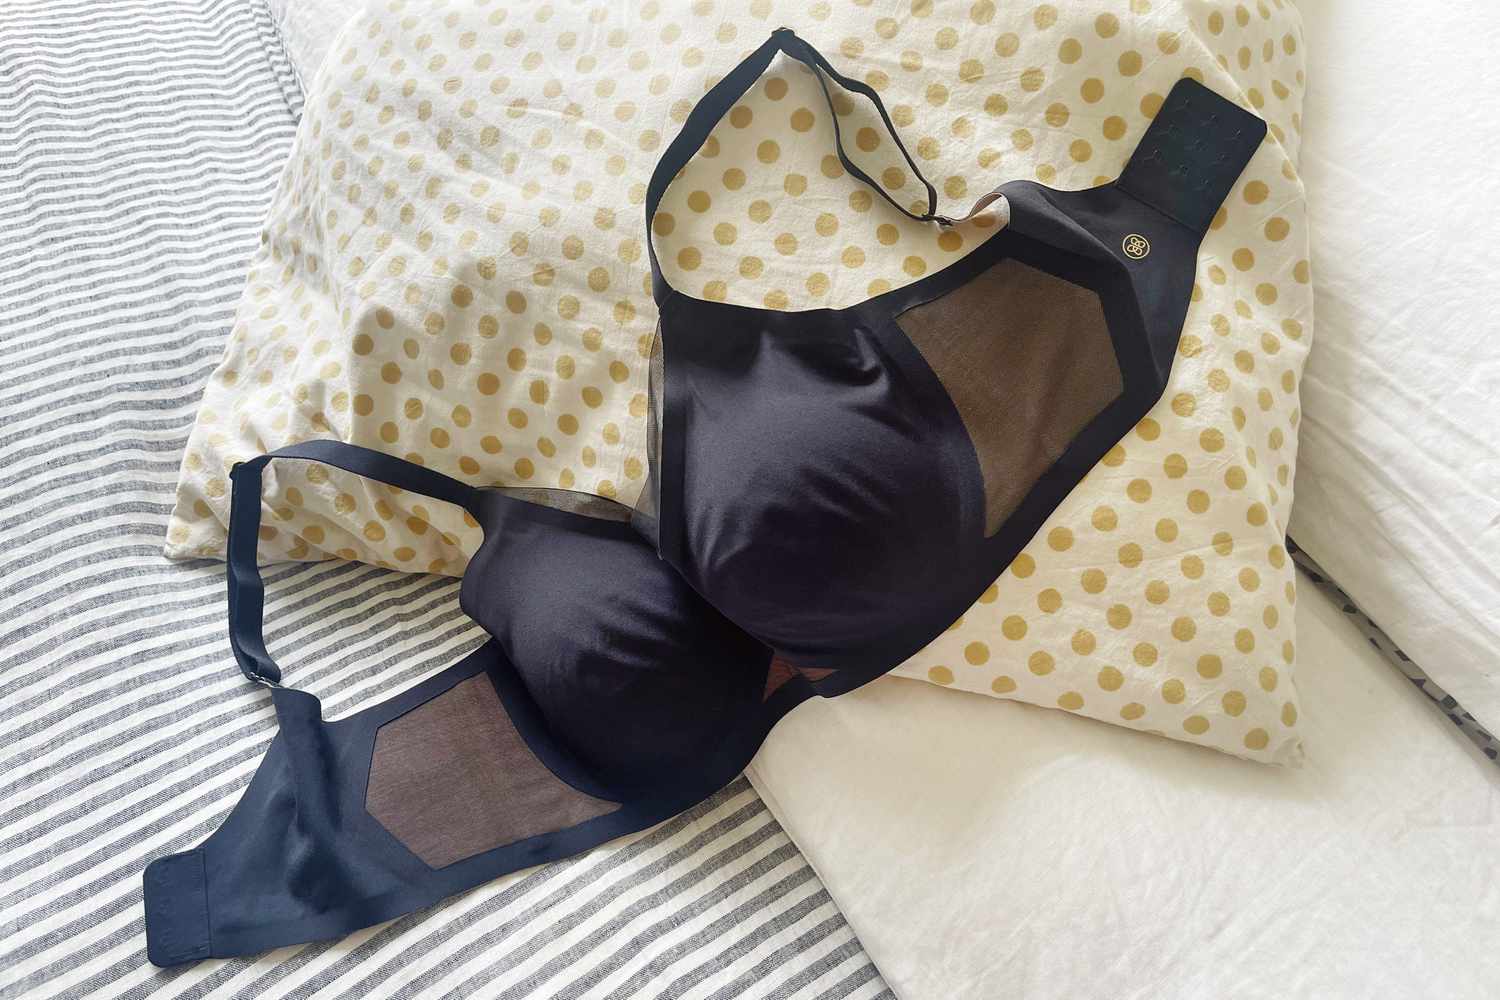 Honeylove Crossover Bra displayed on a pillow